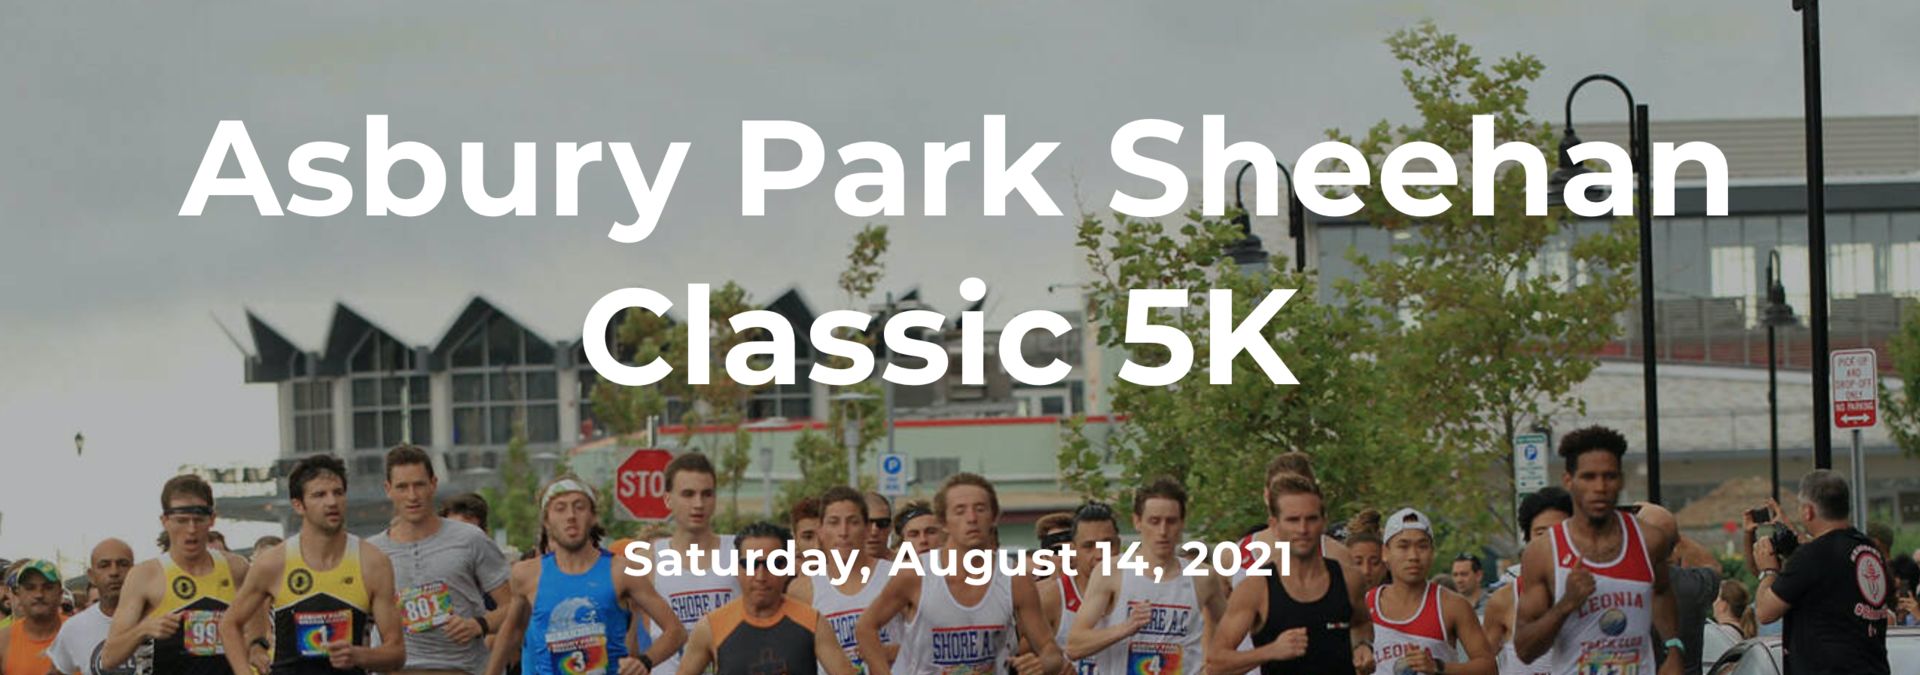 Asbury Park Sheehan Classic 5k, Monmouth, New Jersey, United States